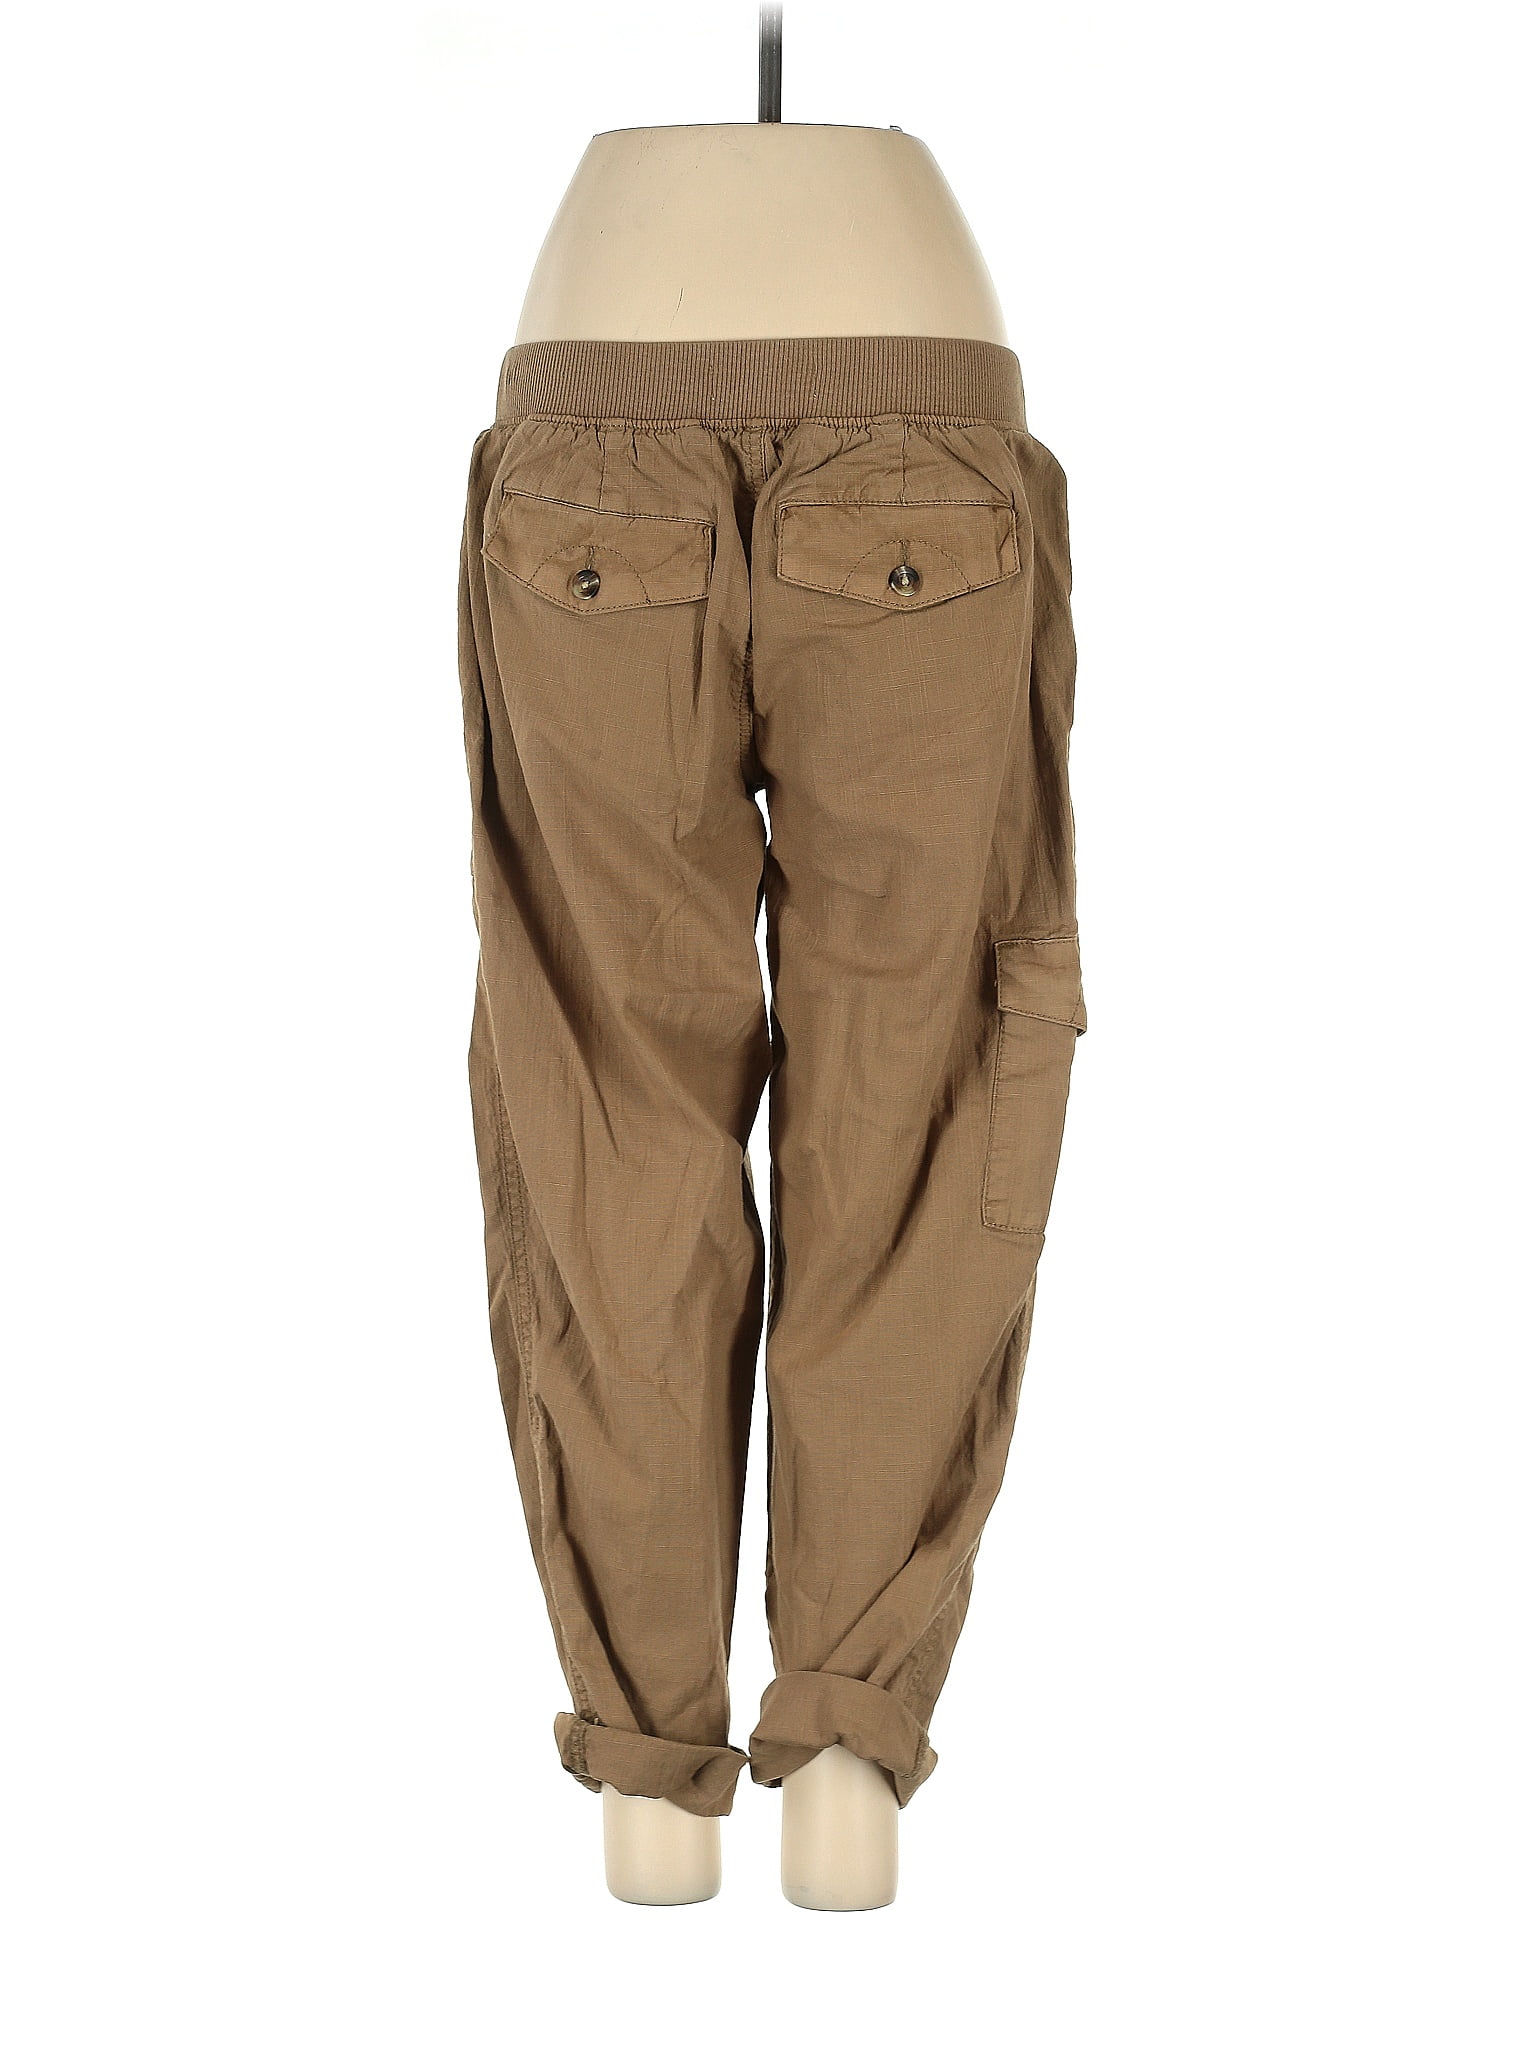 Zyia Active Brown Active Pants Size 2 - 78% off